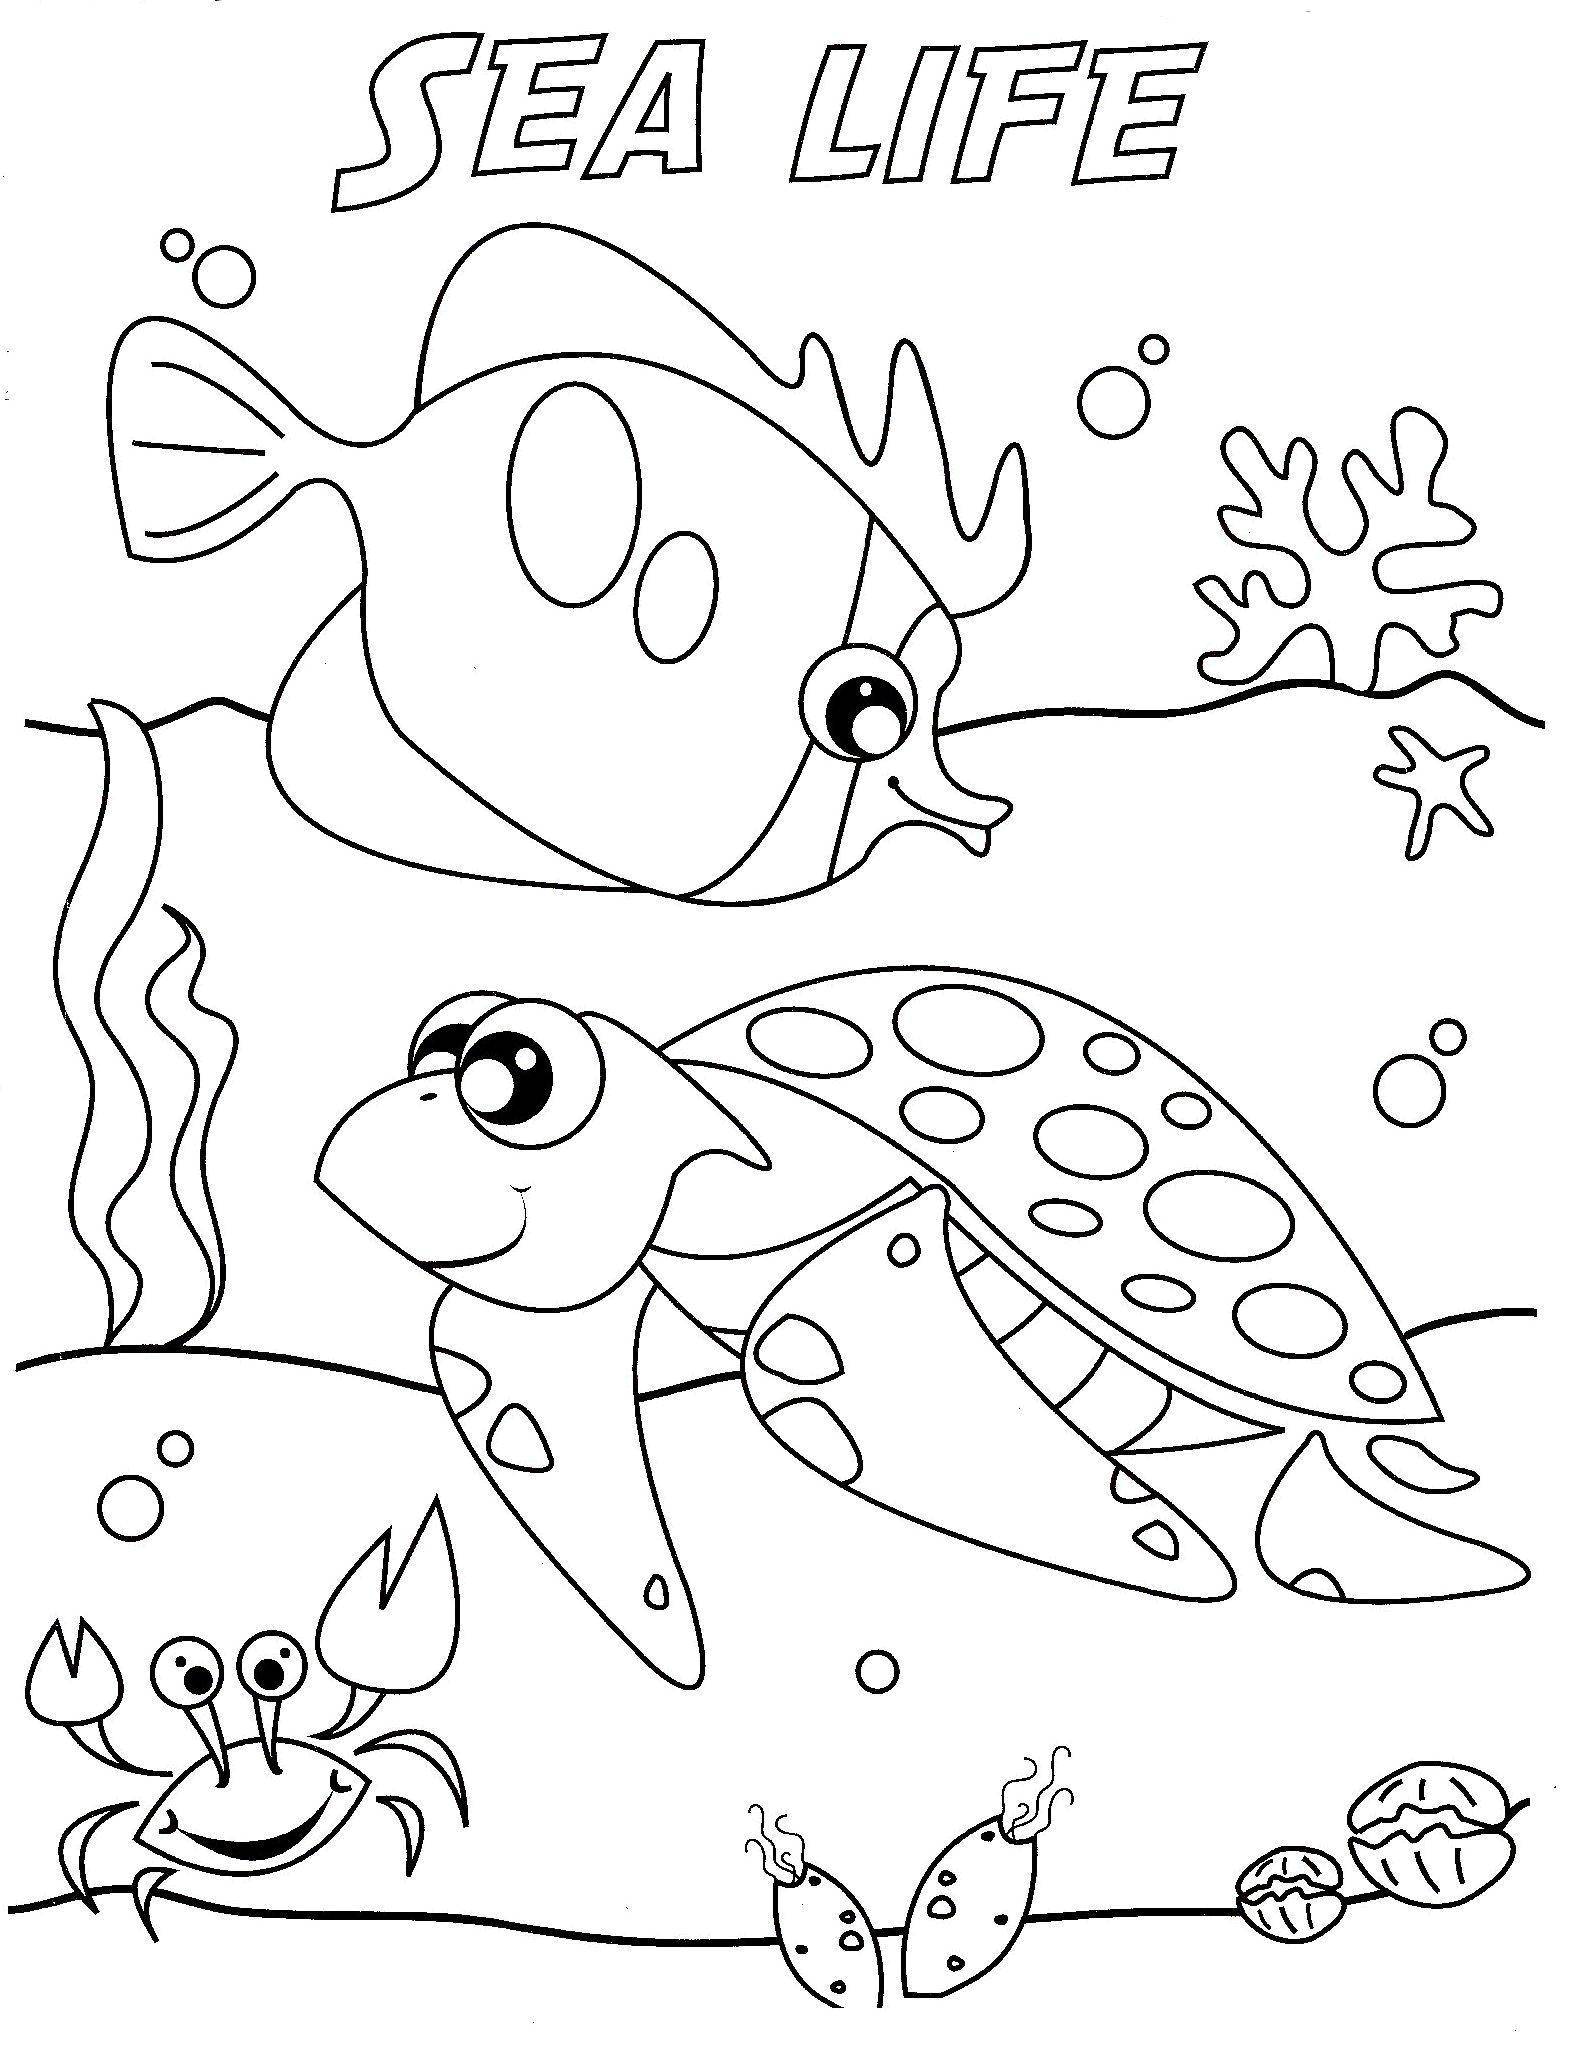 Coloring Marine life. Category marine. Tags:  Underwater world, fish.